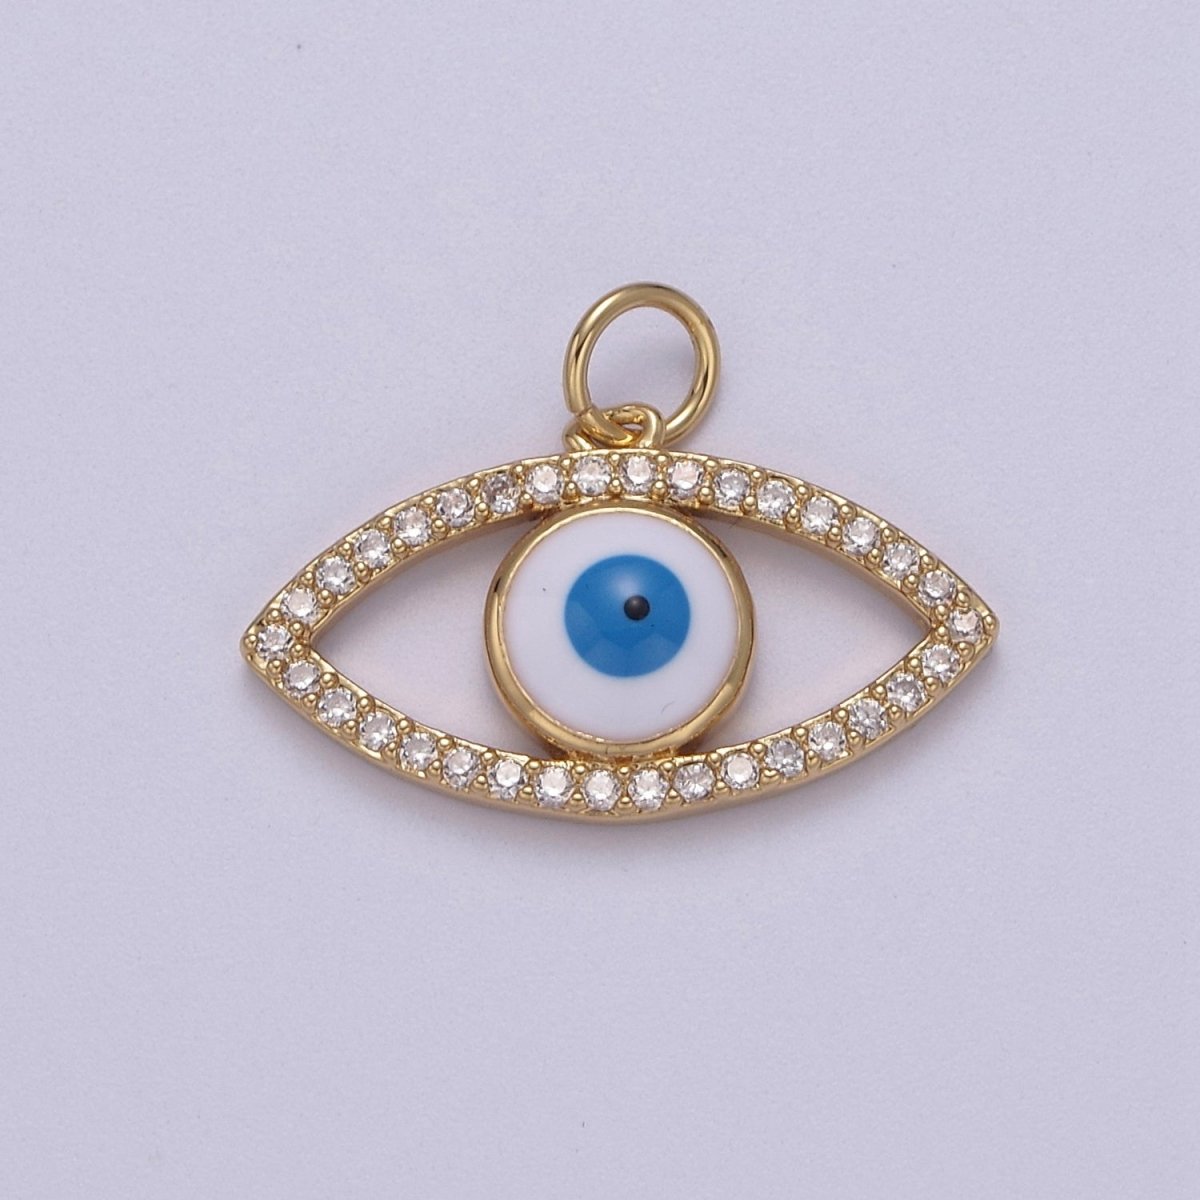 Cubic Evil Eye Charm, 14K Gold Filled Micro CZ Pave Pendant, 16.7*22mm, Necklace Earring Bracelet Making, Jewelry Finding D-612 - DLUXCA